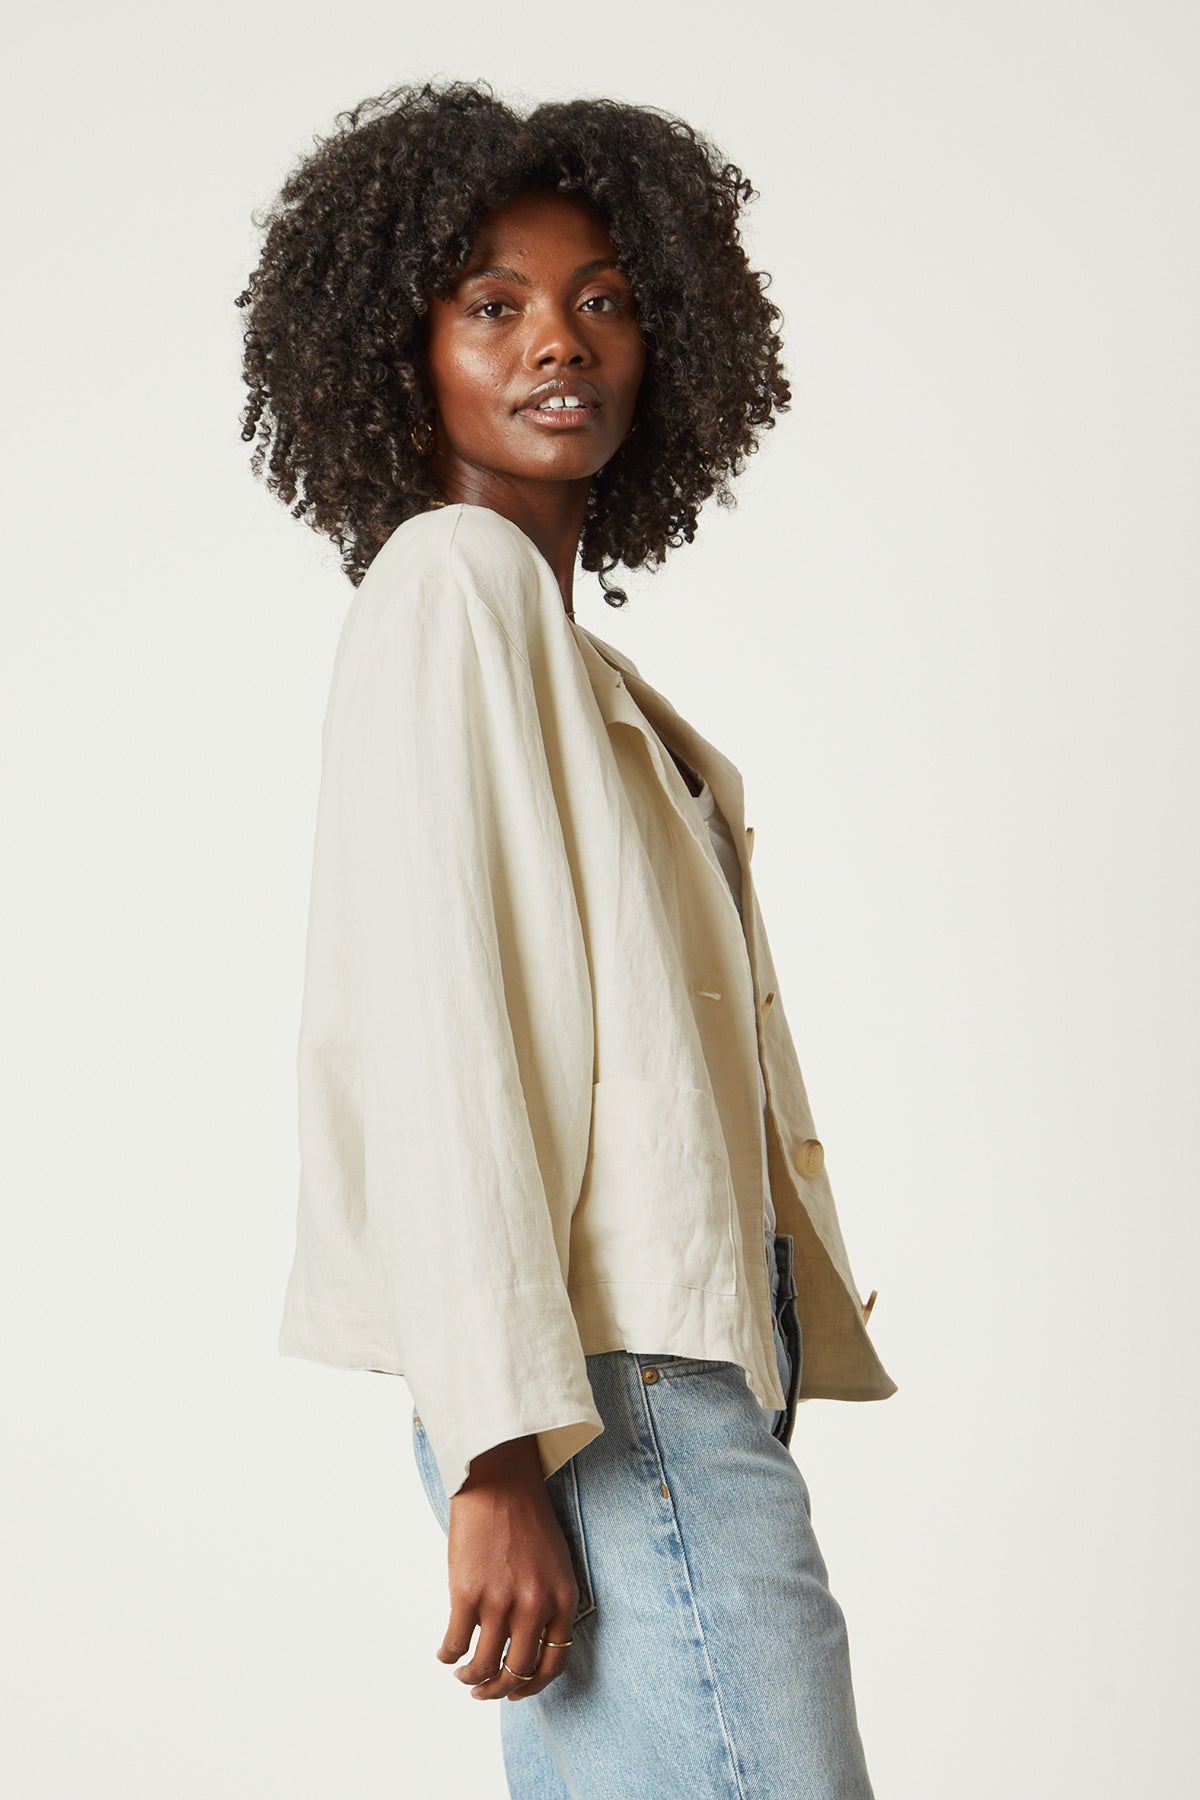   The model is wearing a Velvet by Graham & Spencer BRIELLE HEAVY LINEN JACKET and jeans. 